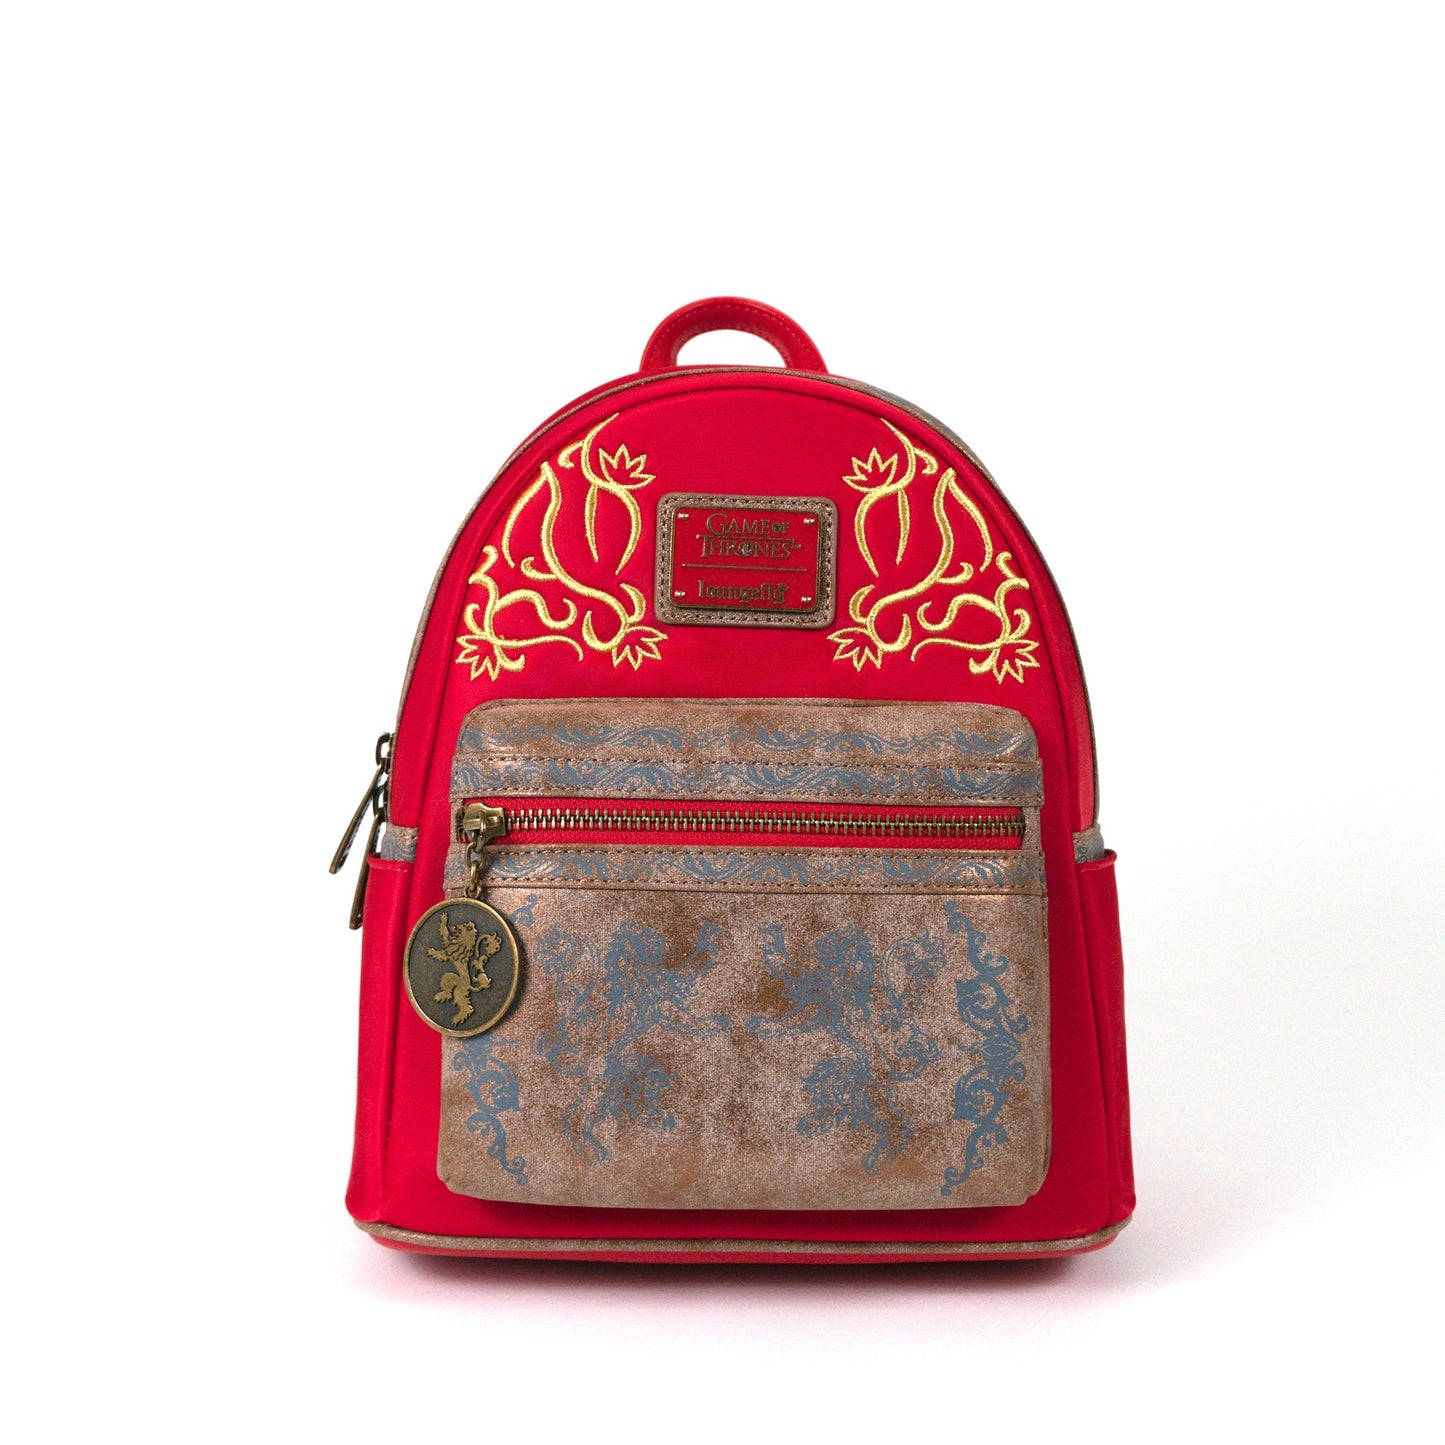 PREORDER EIGHT3FIVE x Loungefly Game Of Thrones Cersei Lannister Mini Backpack Backpacks Loungefly 